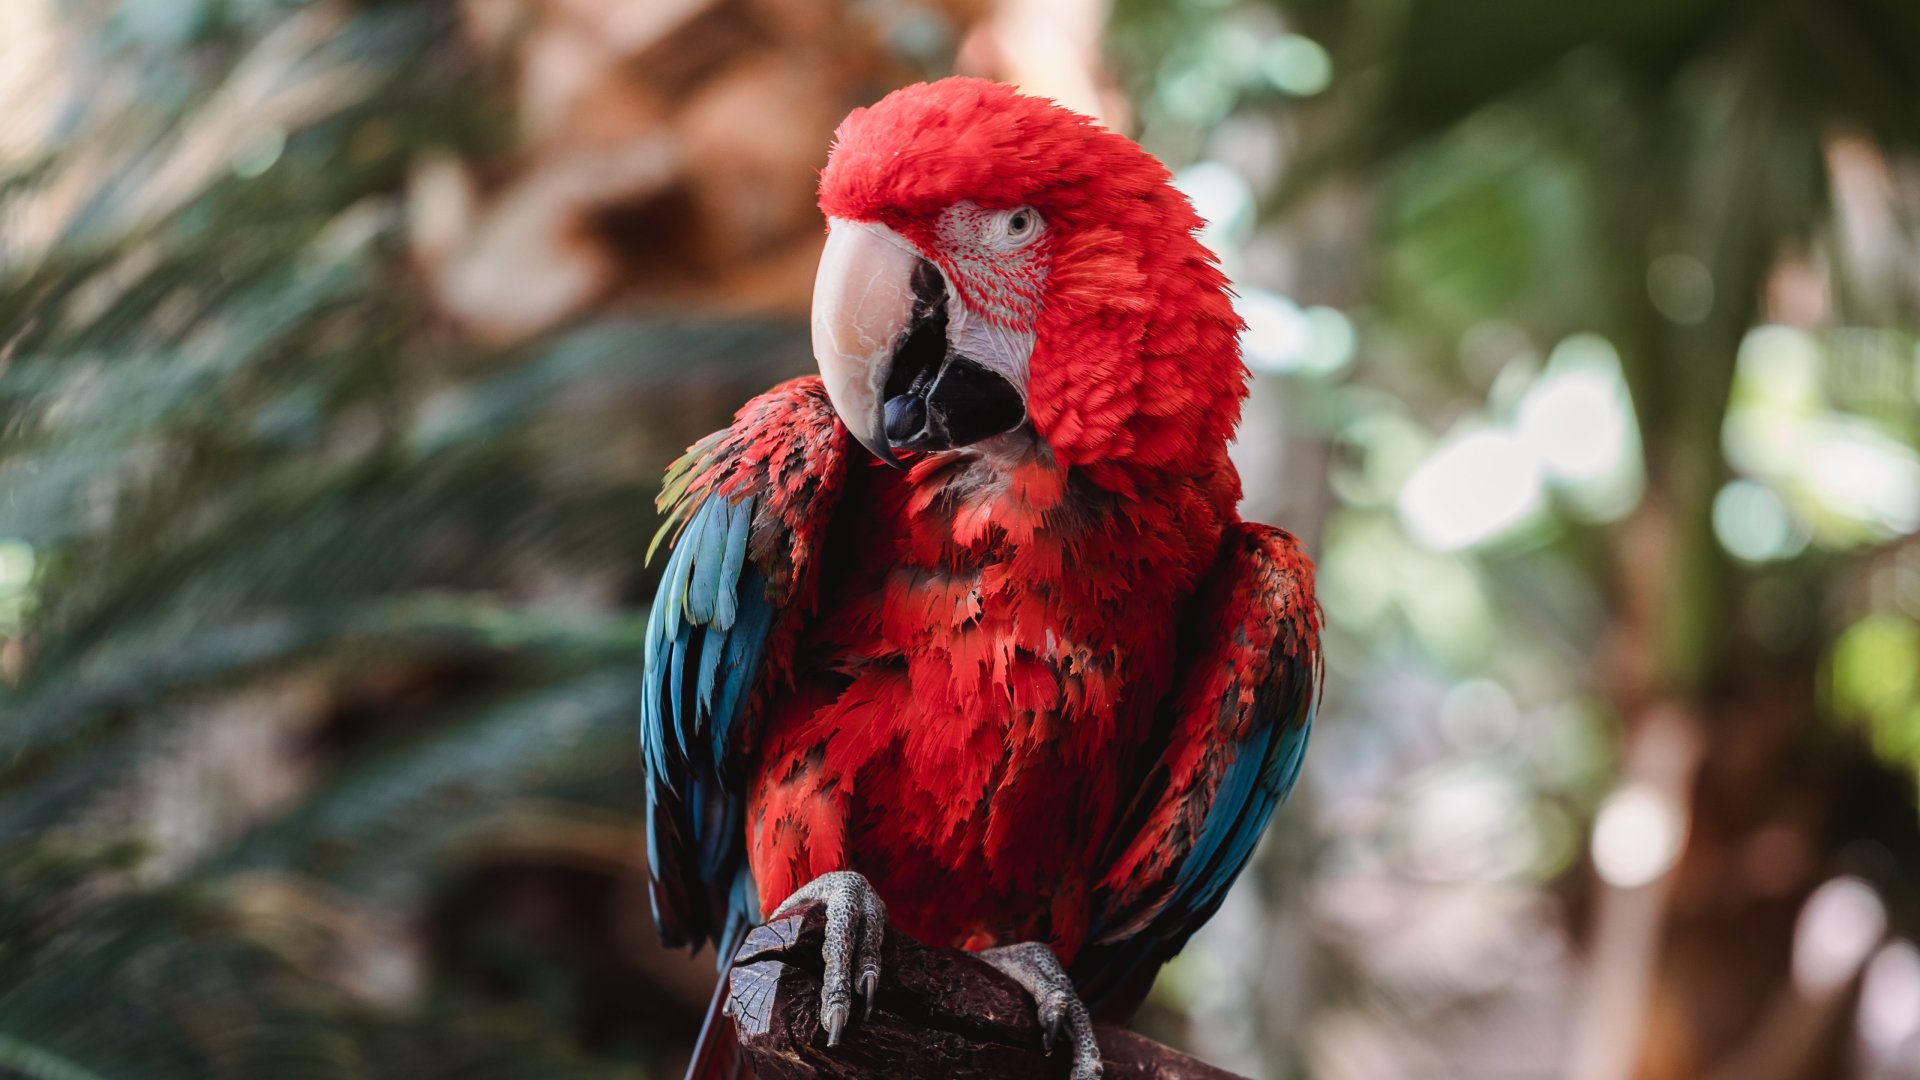 Download Parrot Bird Animal Red-and-green Macaw Red-and-green Macaw  4k Ultra HD Wallpaper by Jason Leung